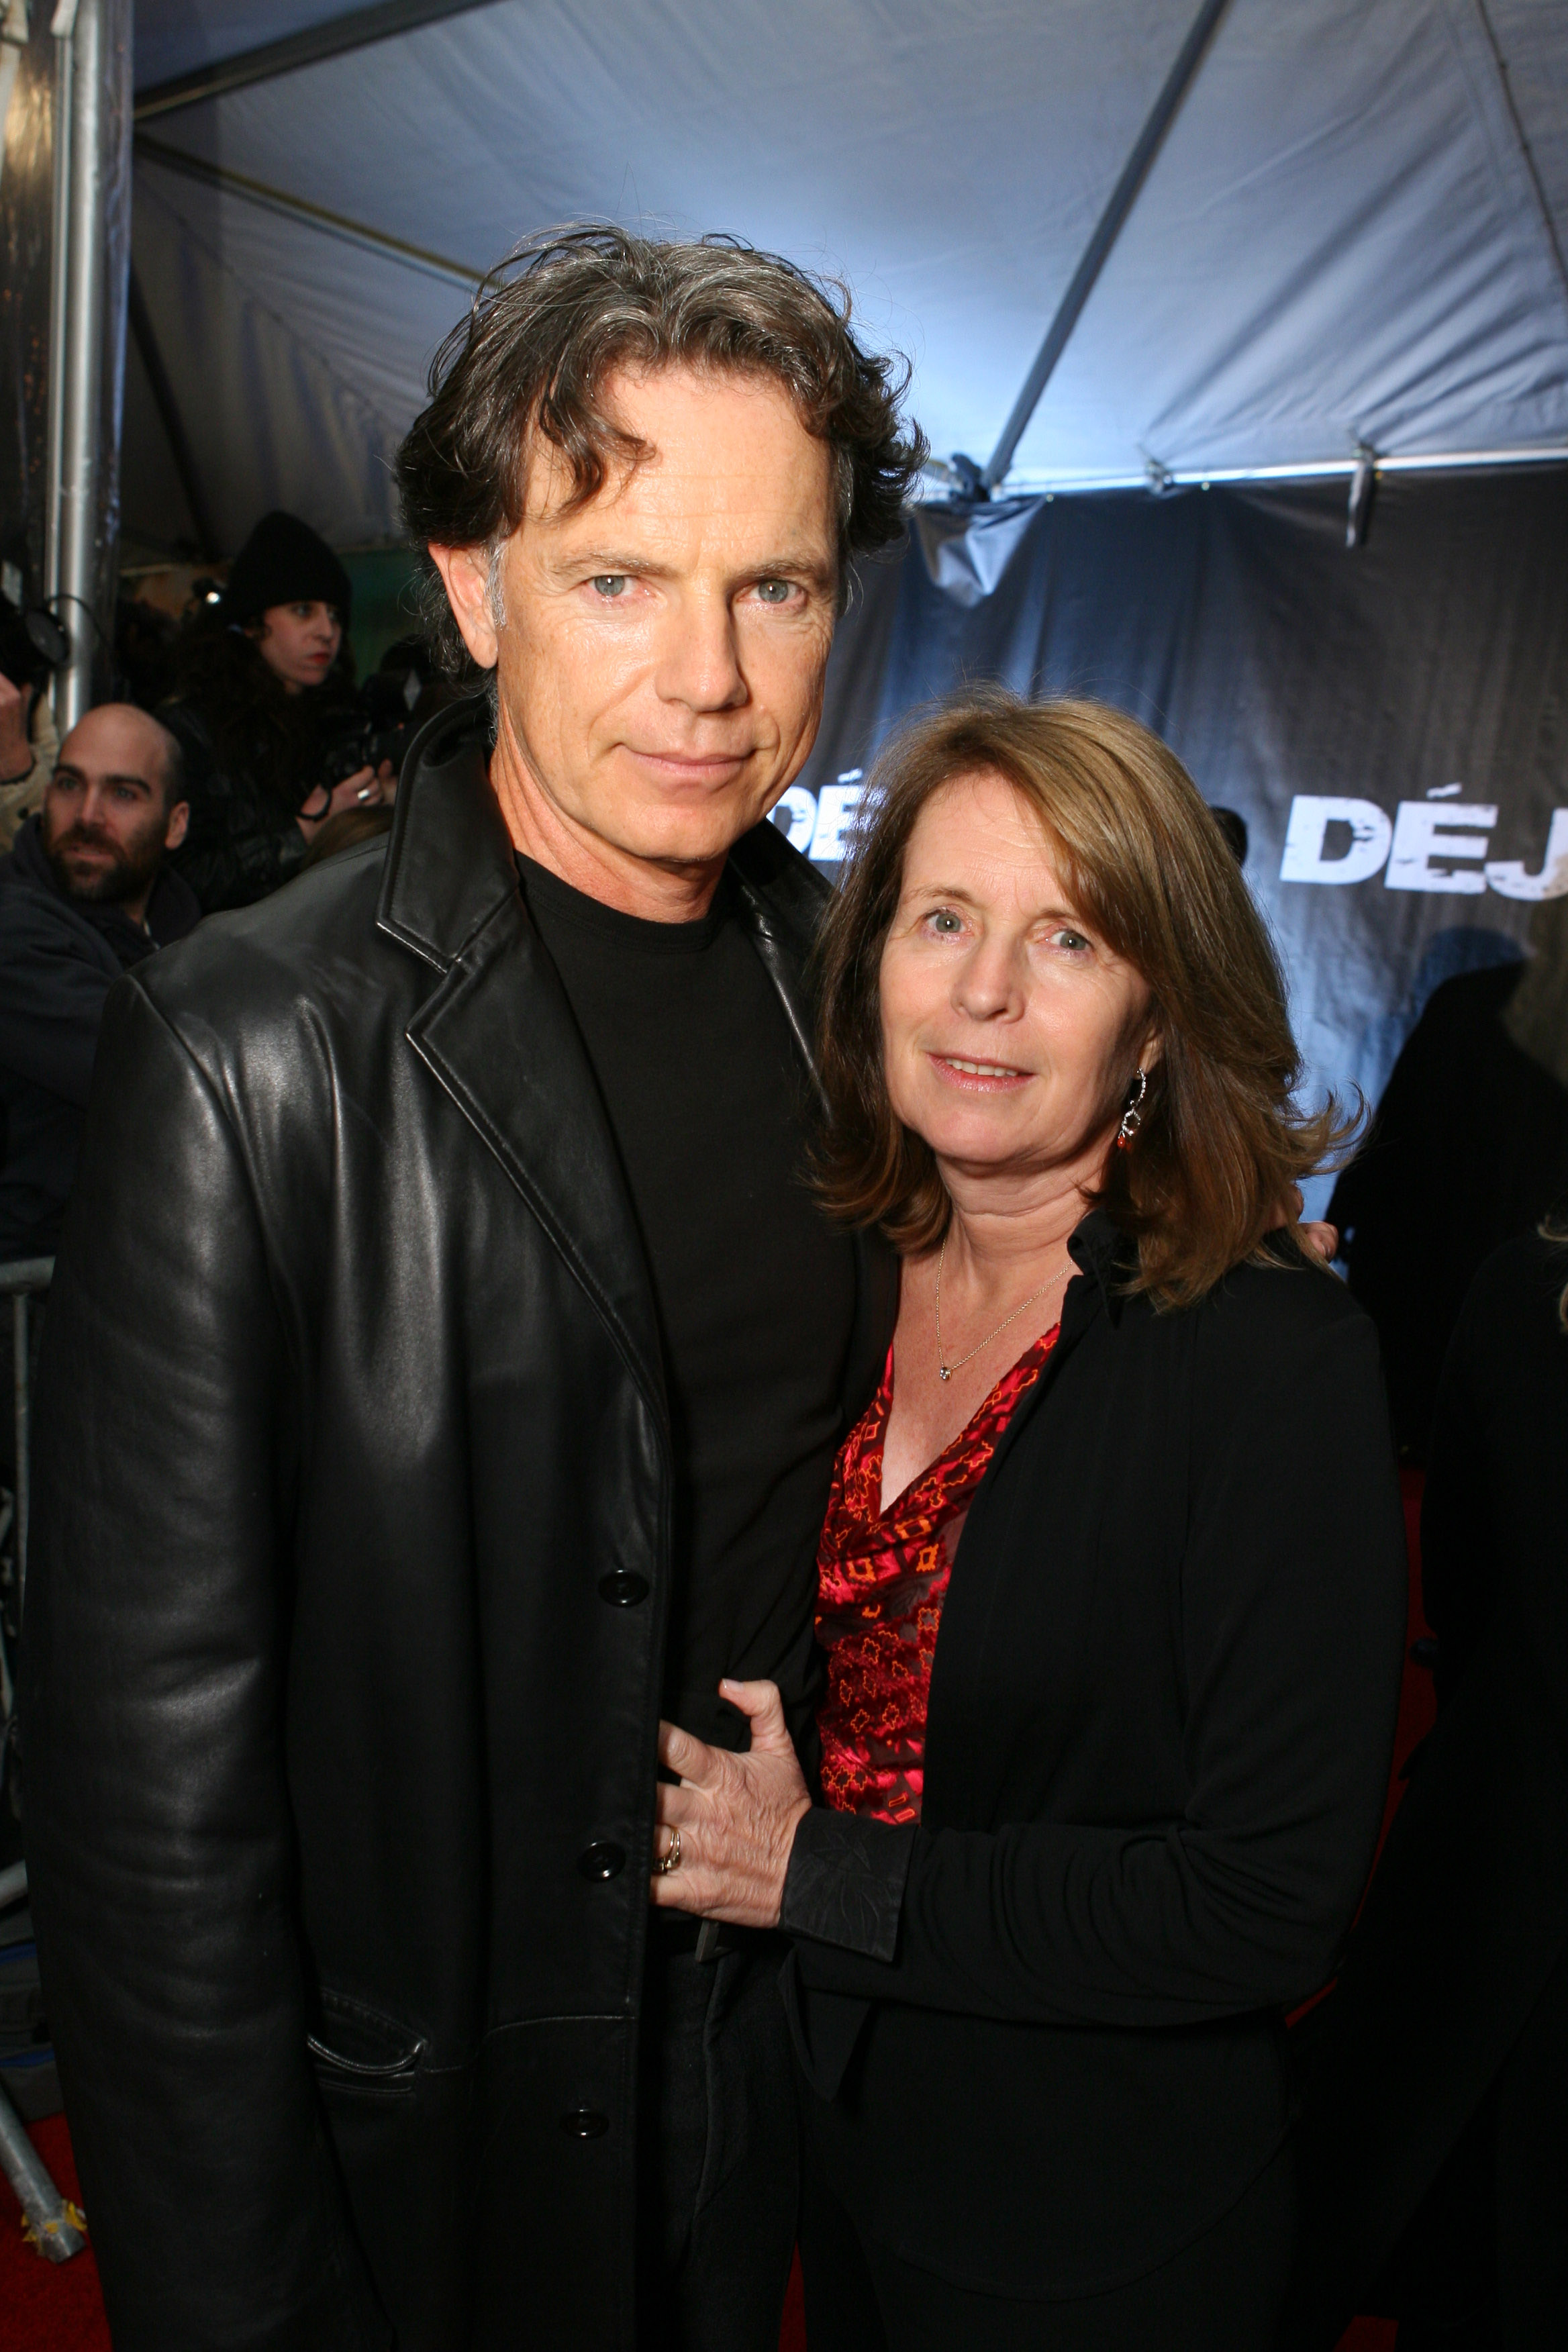 Bruce Greenwood and Susan Devlin at the premiere of "Deja Vu" on November 20, 2006, in New York. | Source: Getty Images